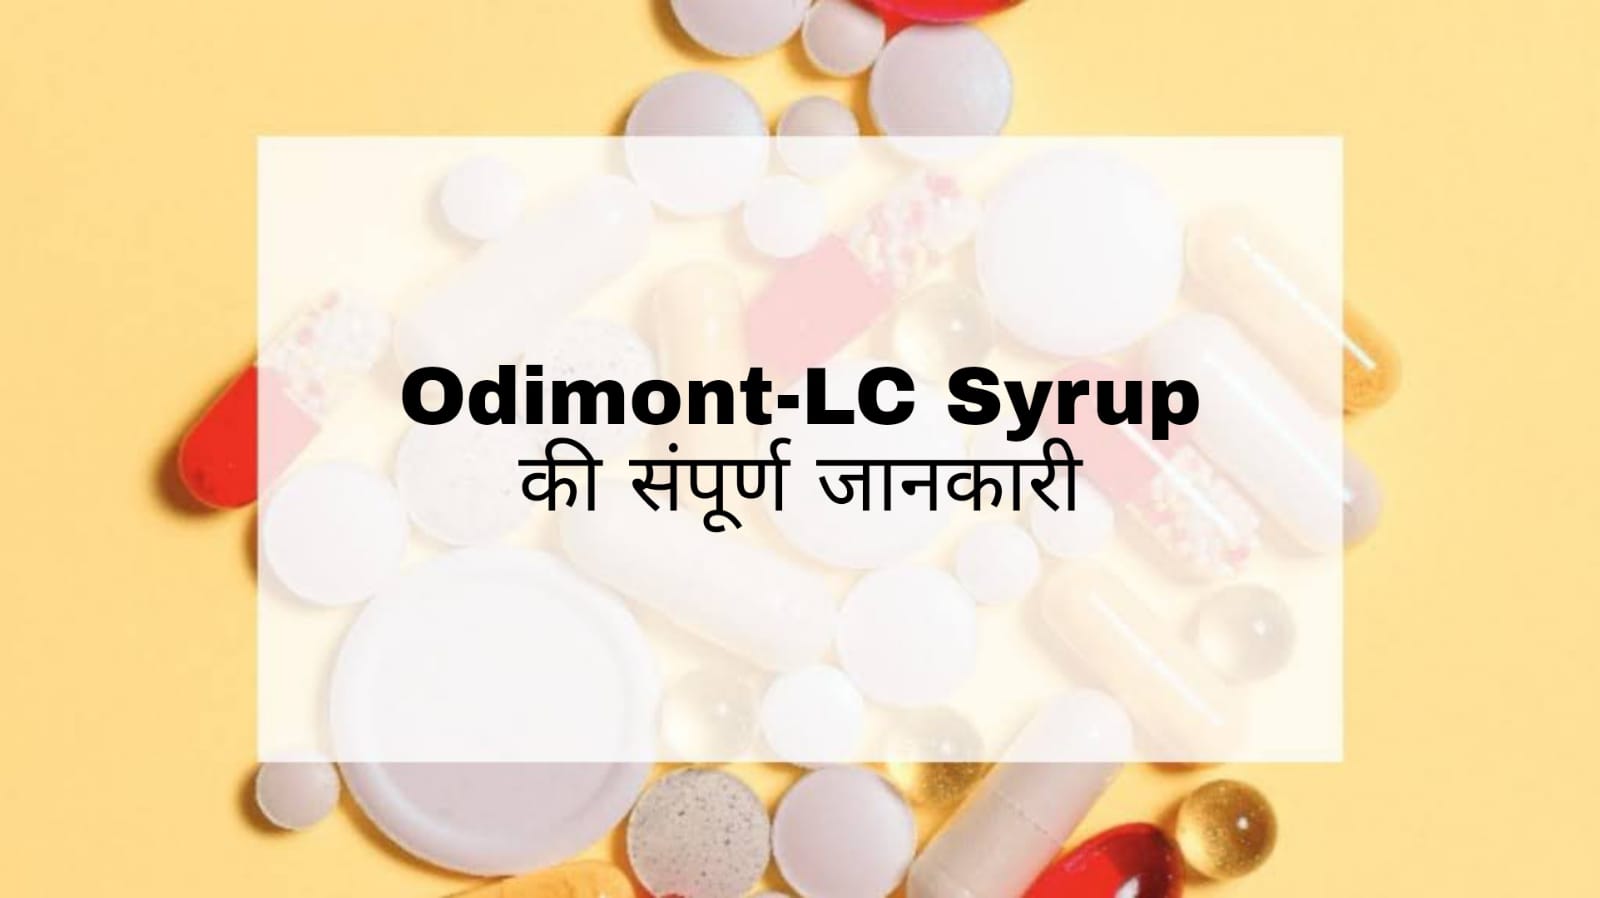 Odimont-LC Syrup Hindi